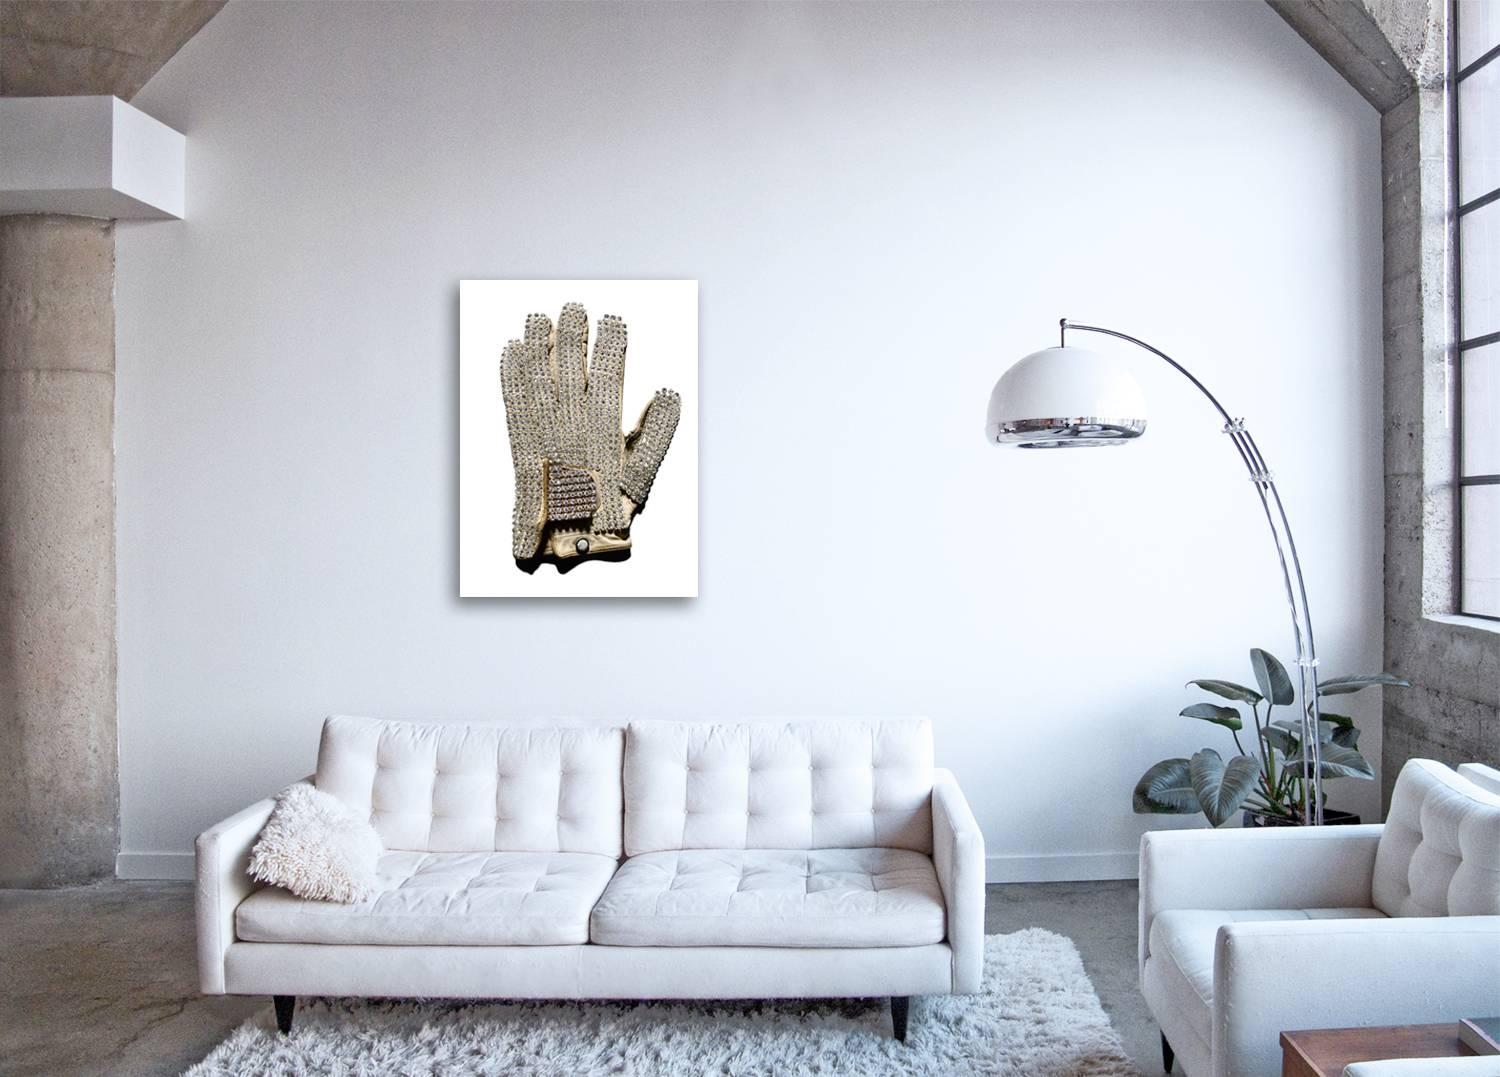 White Glove ( Michael Jackson ) - large format iconic still life photograph - Contemporary Photograph by Tom Schierlitz